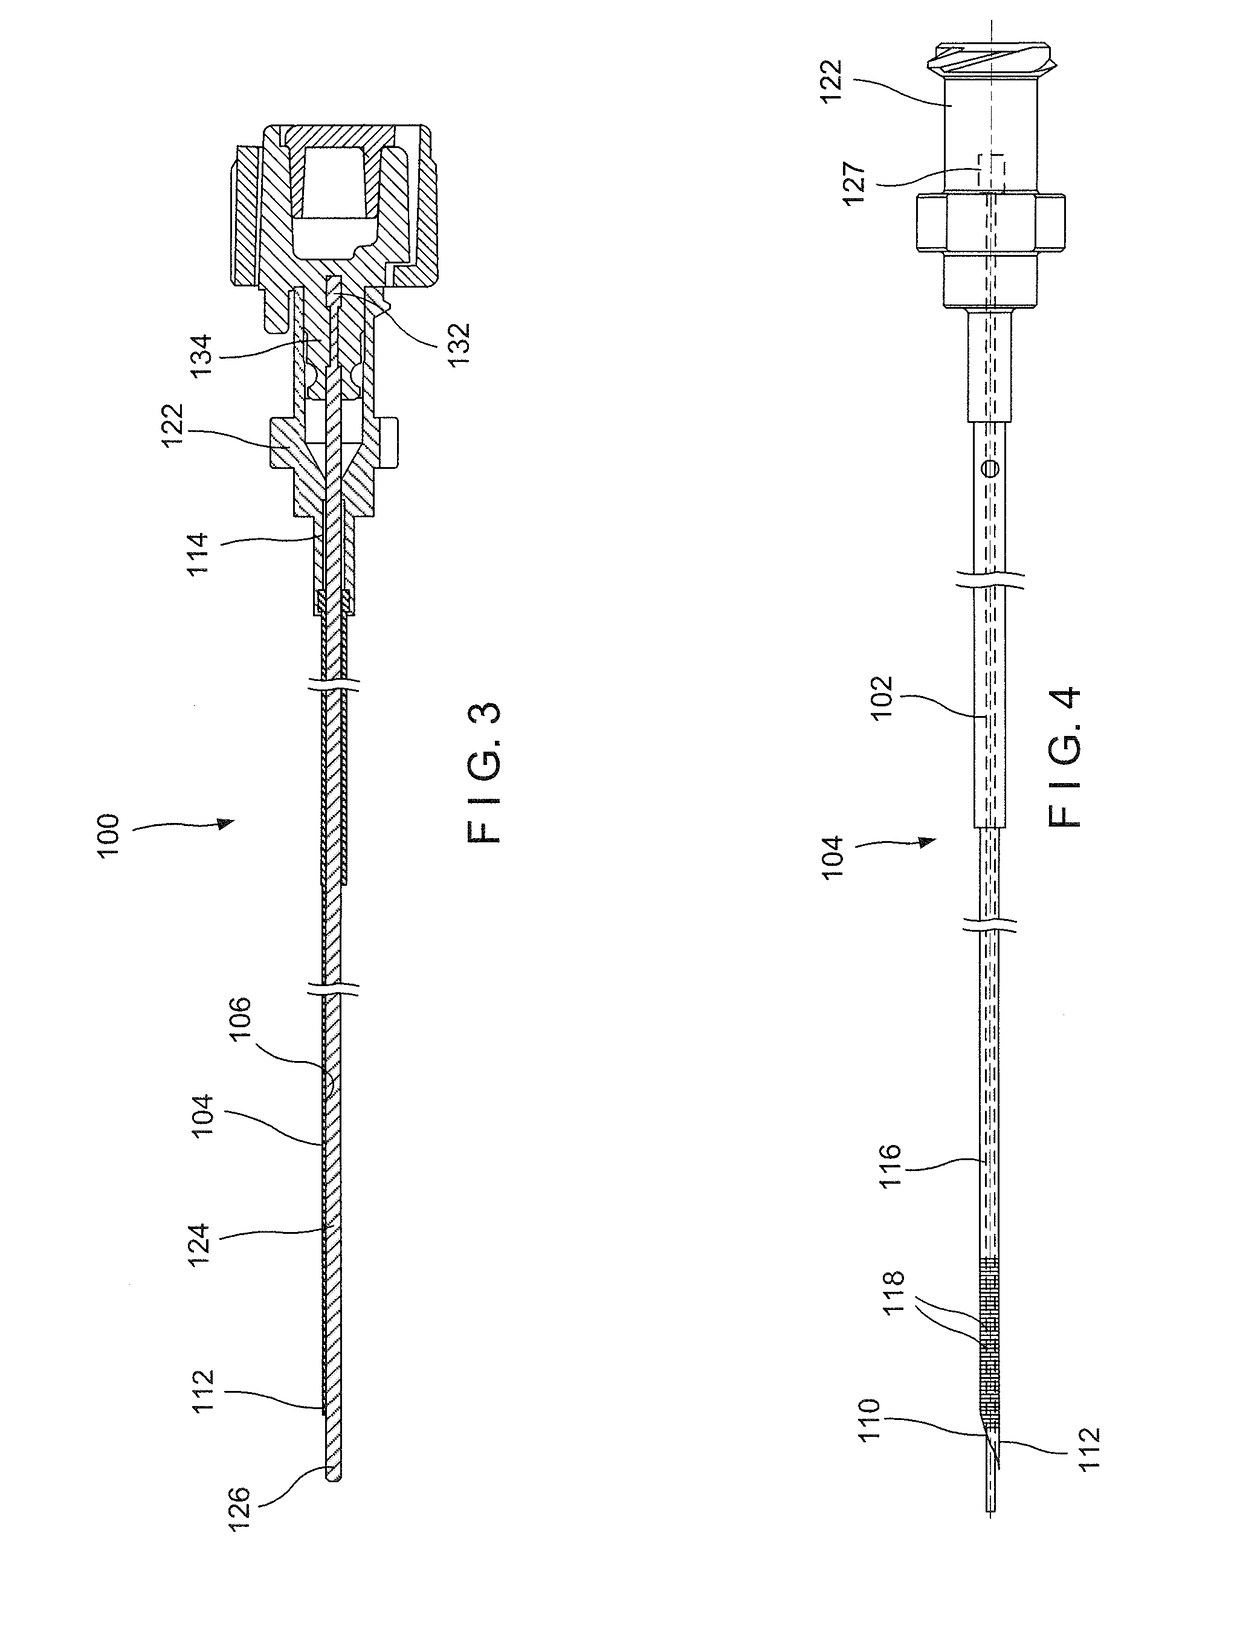 Accessory device for EUS-FNA needle for guidewire passage